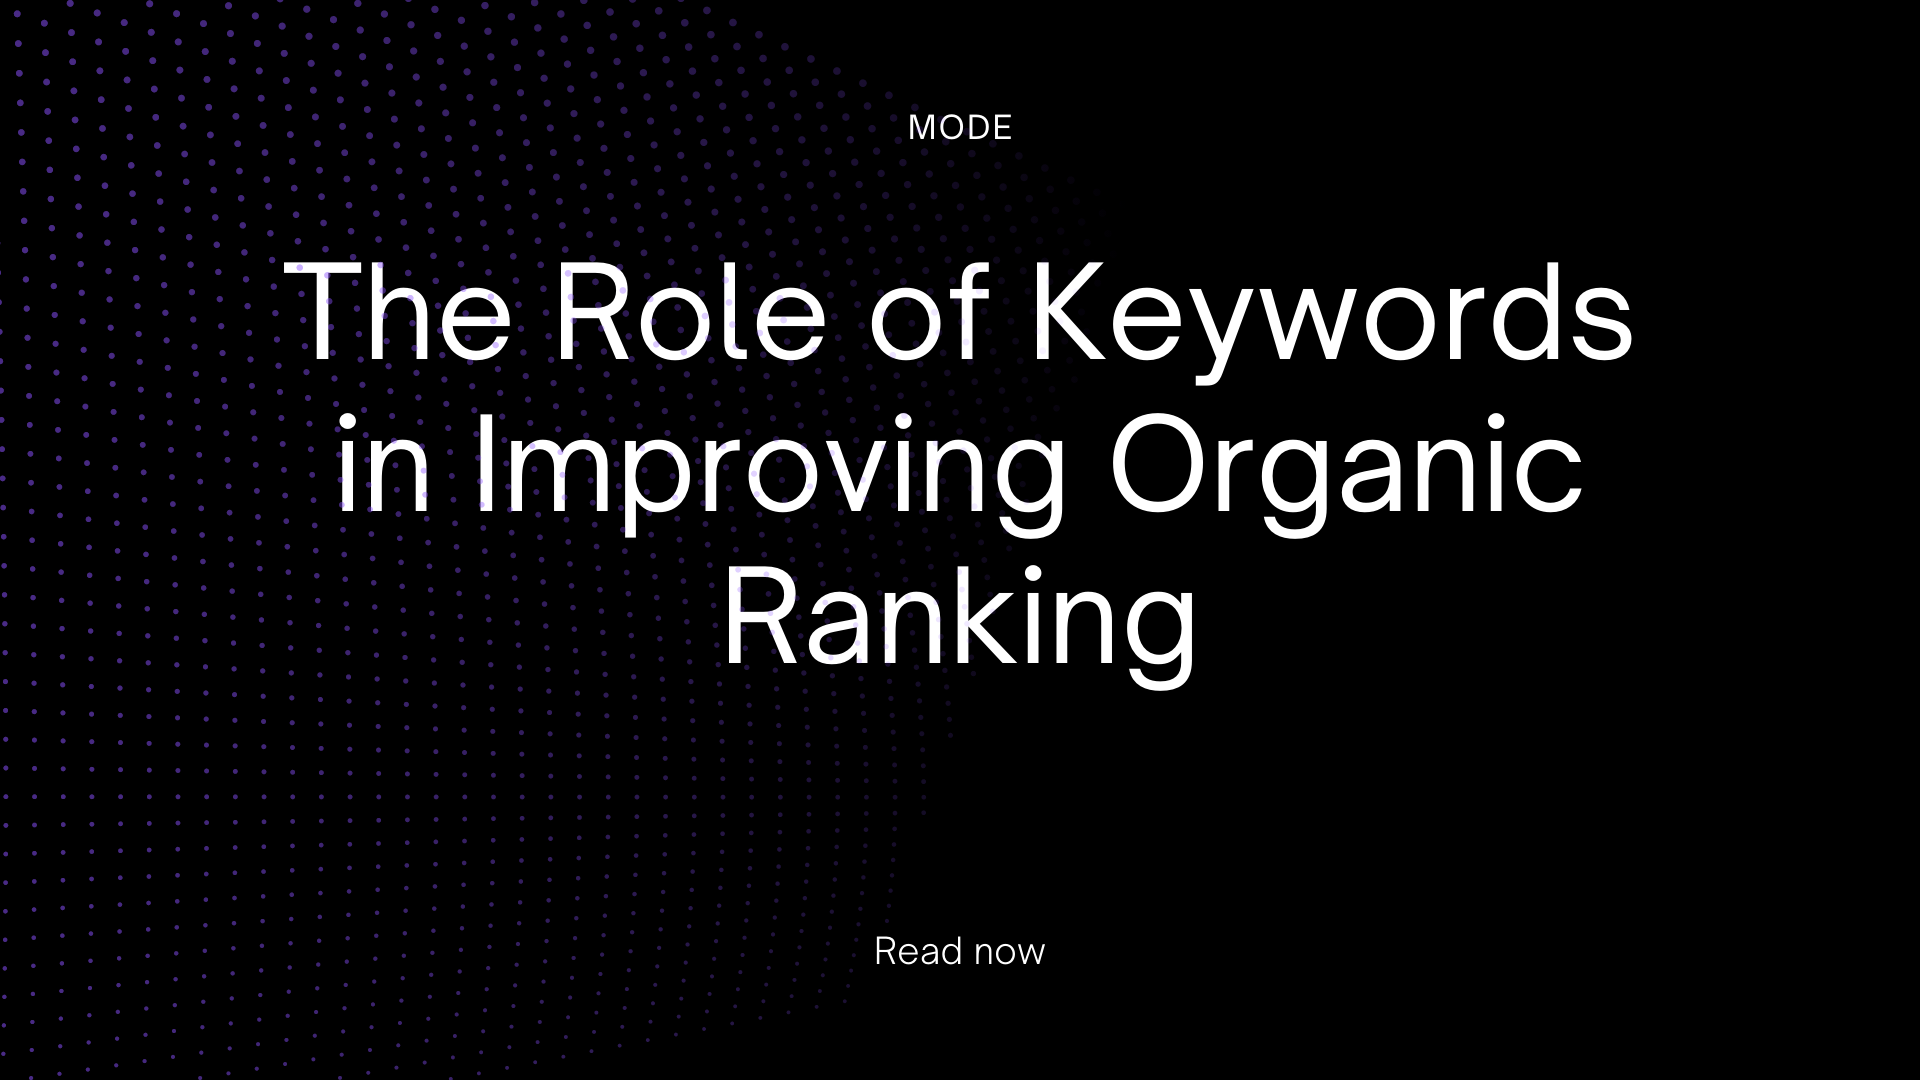 The Role of Keywords in Improving Organic Ranking